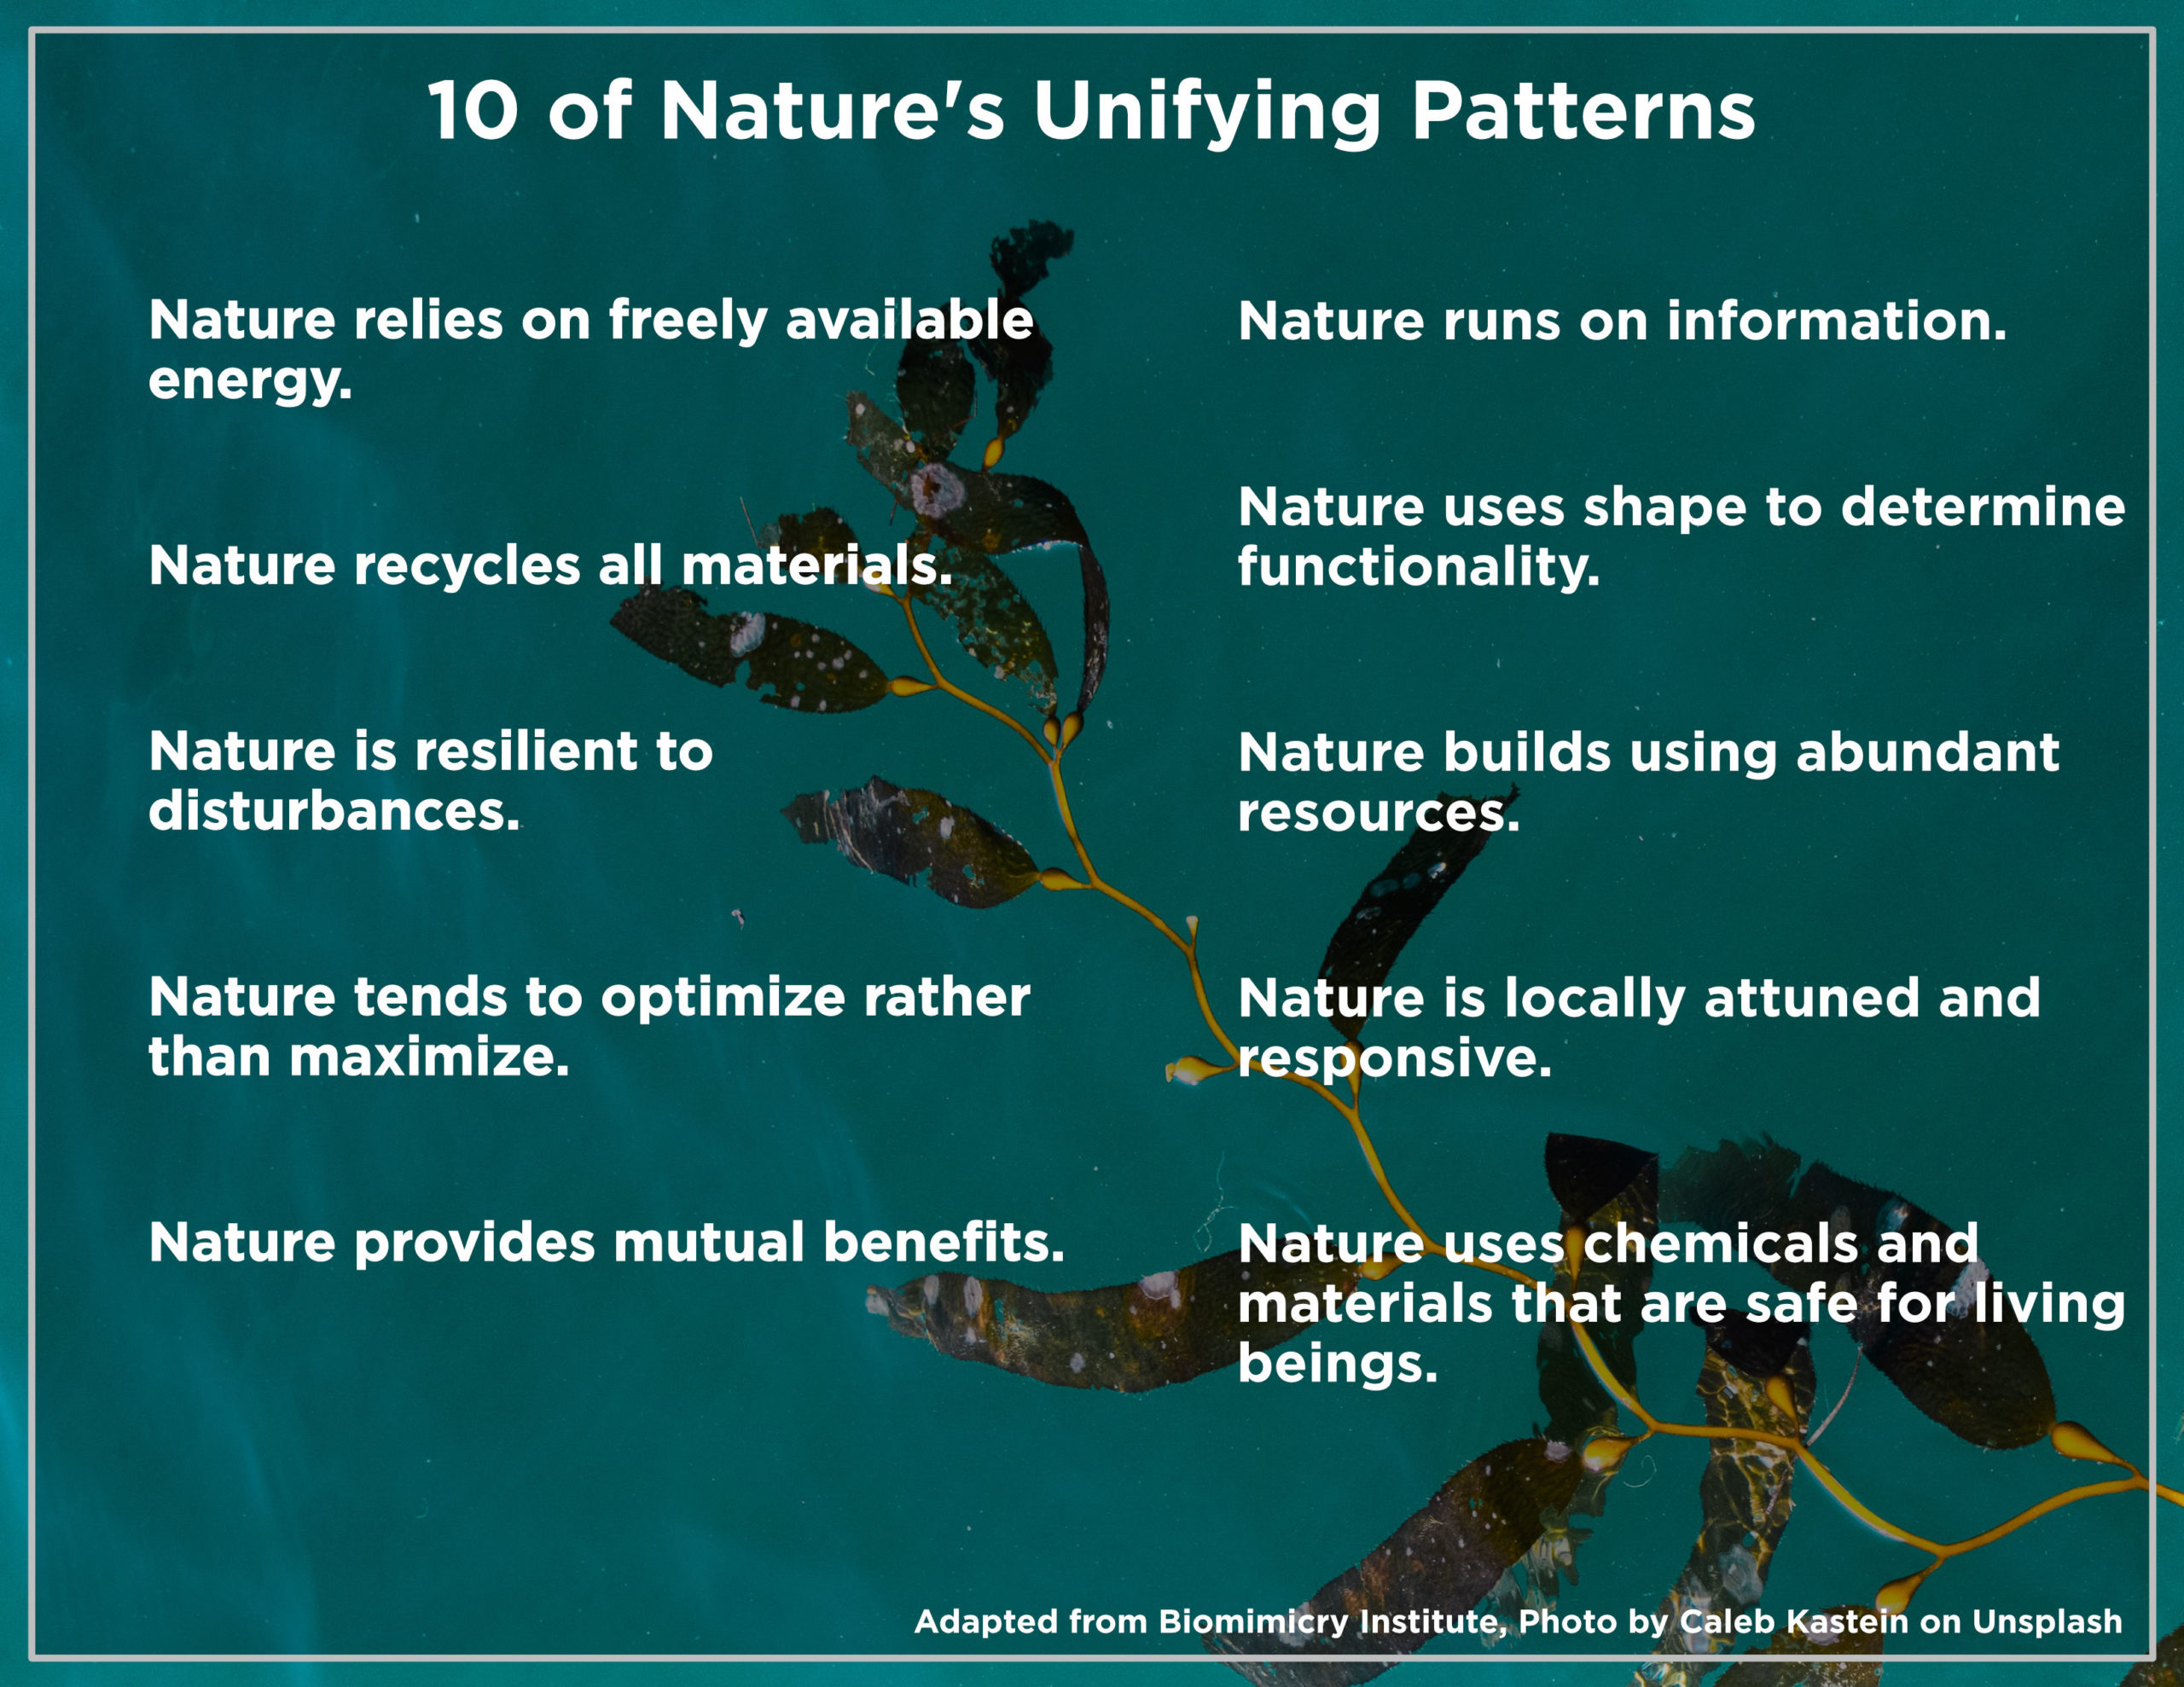 Visual explains 10 unifying patterns of nature